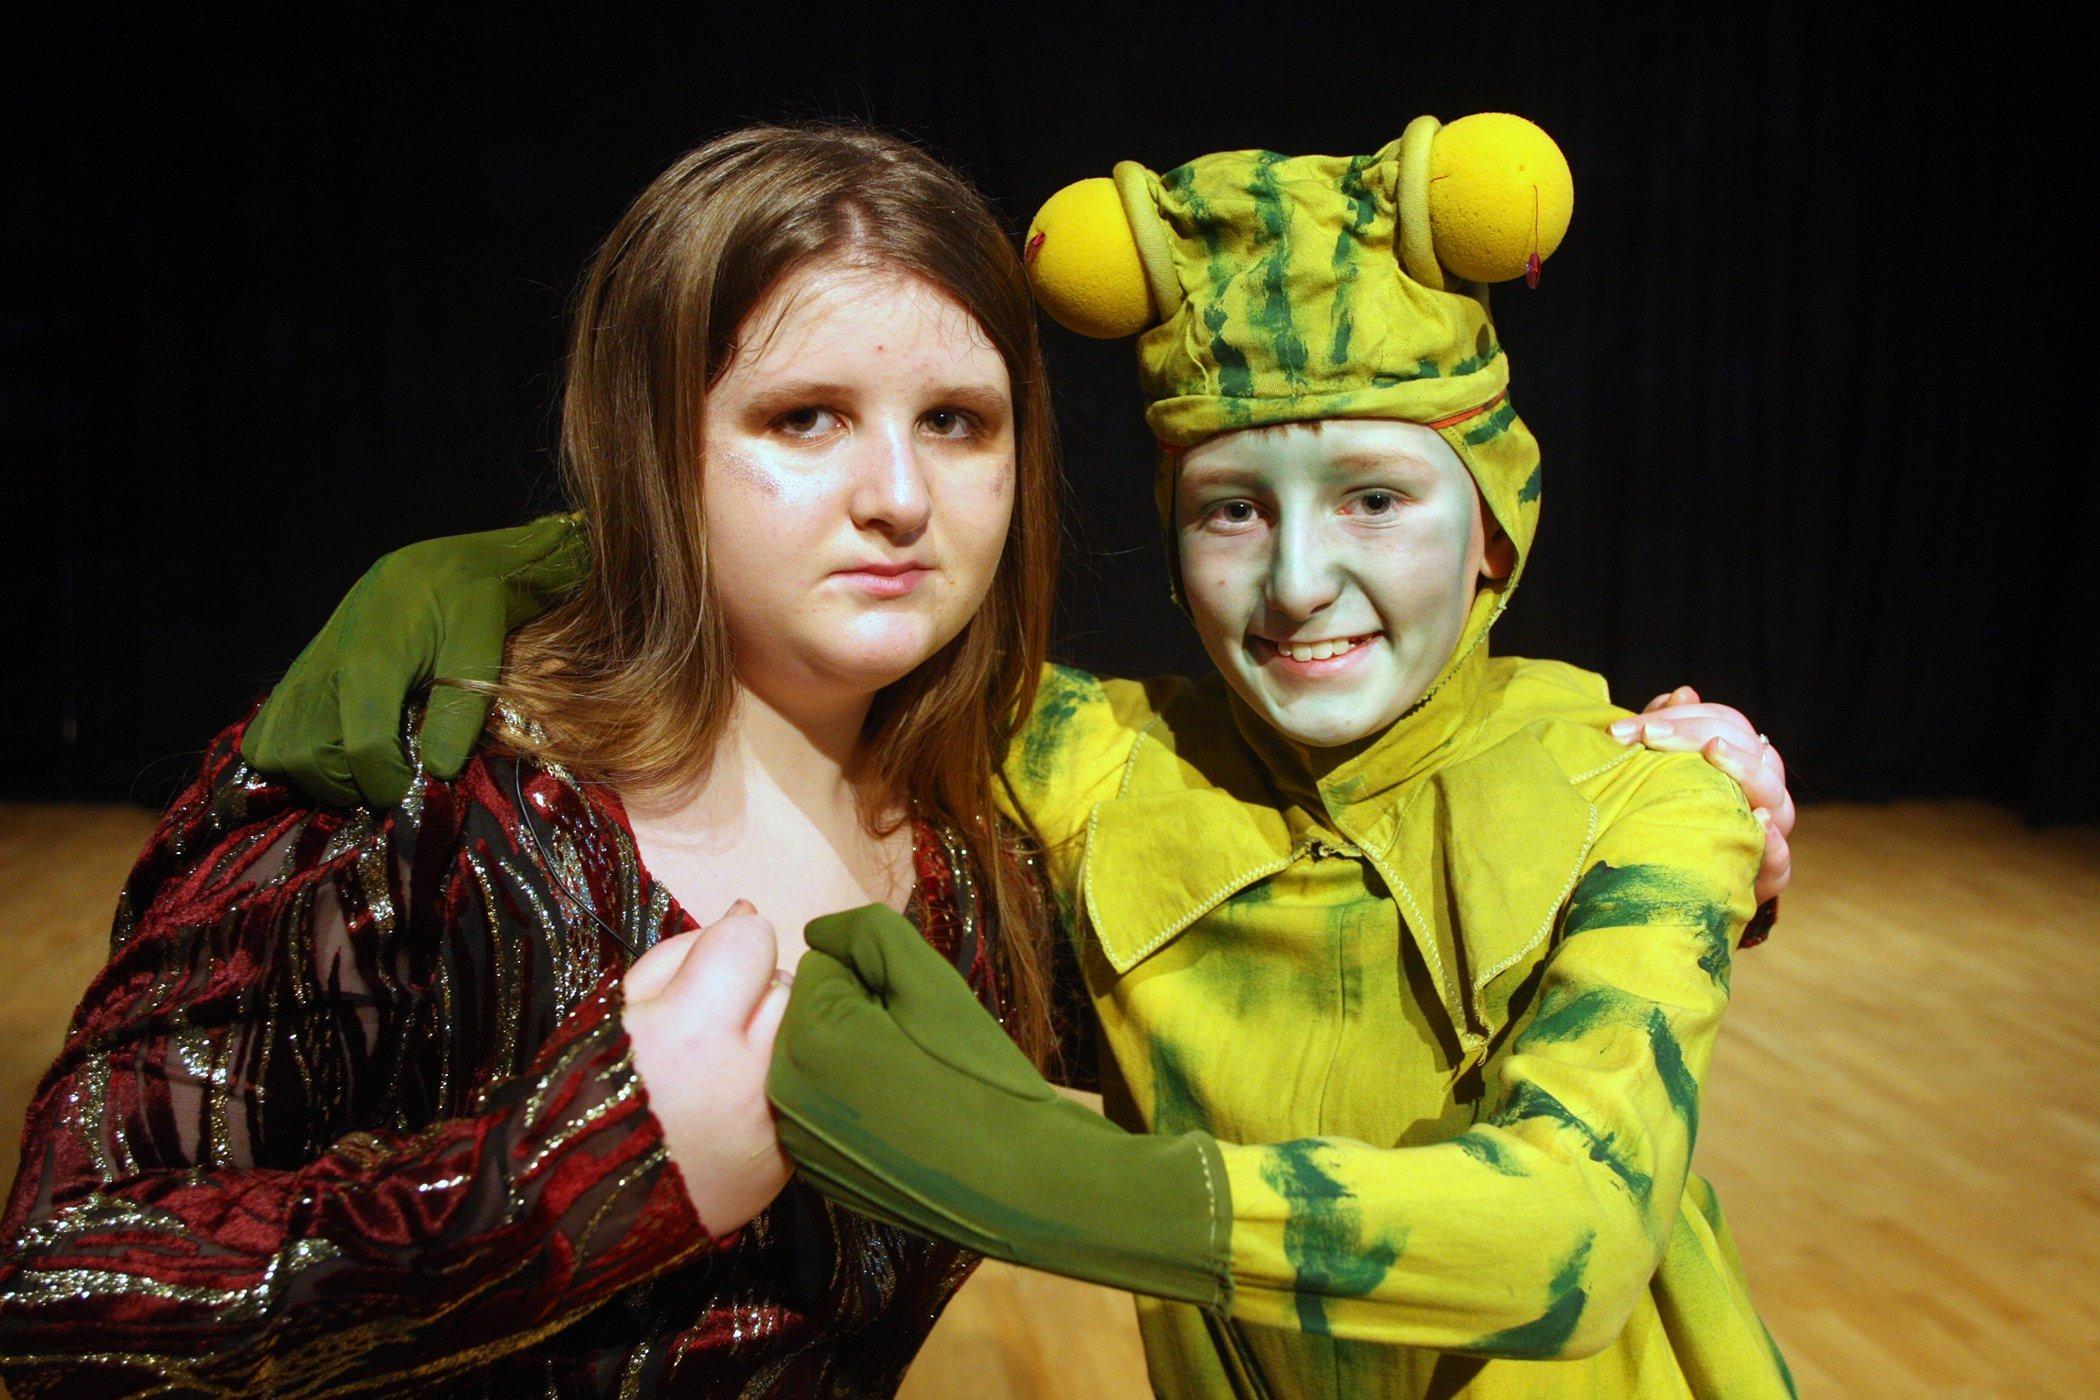 Hermione Hamlen-Shearing, 12, as the fairy and Samuel Lewis, 12, as the ogre. Photo by Derek Martin DM2021000a